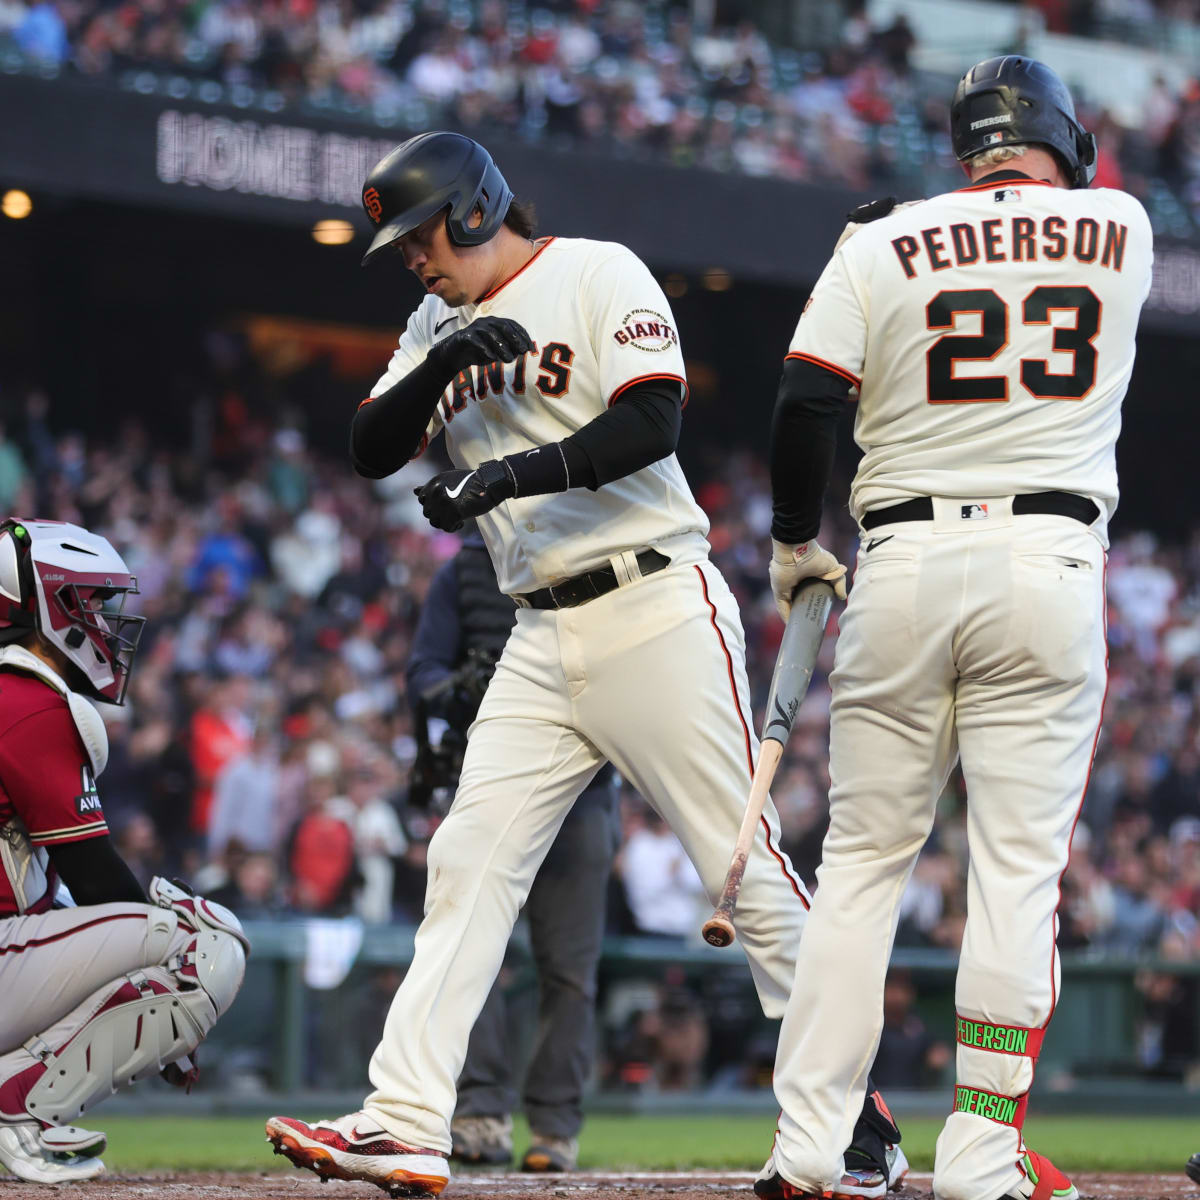 Conforto drives in 4 runs to back Webb in the Giants' 8-5 victory over the  Diamondbacks - The San Diego Union-Tribune